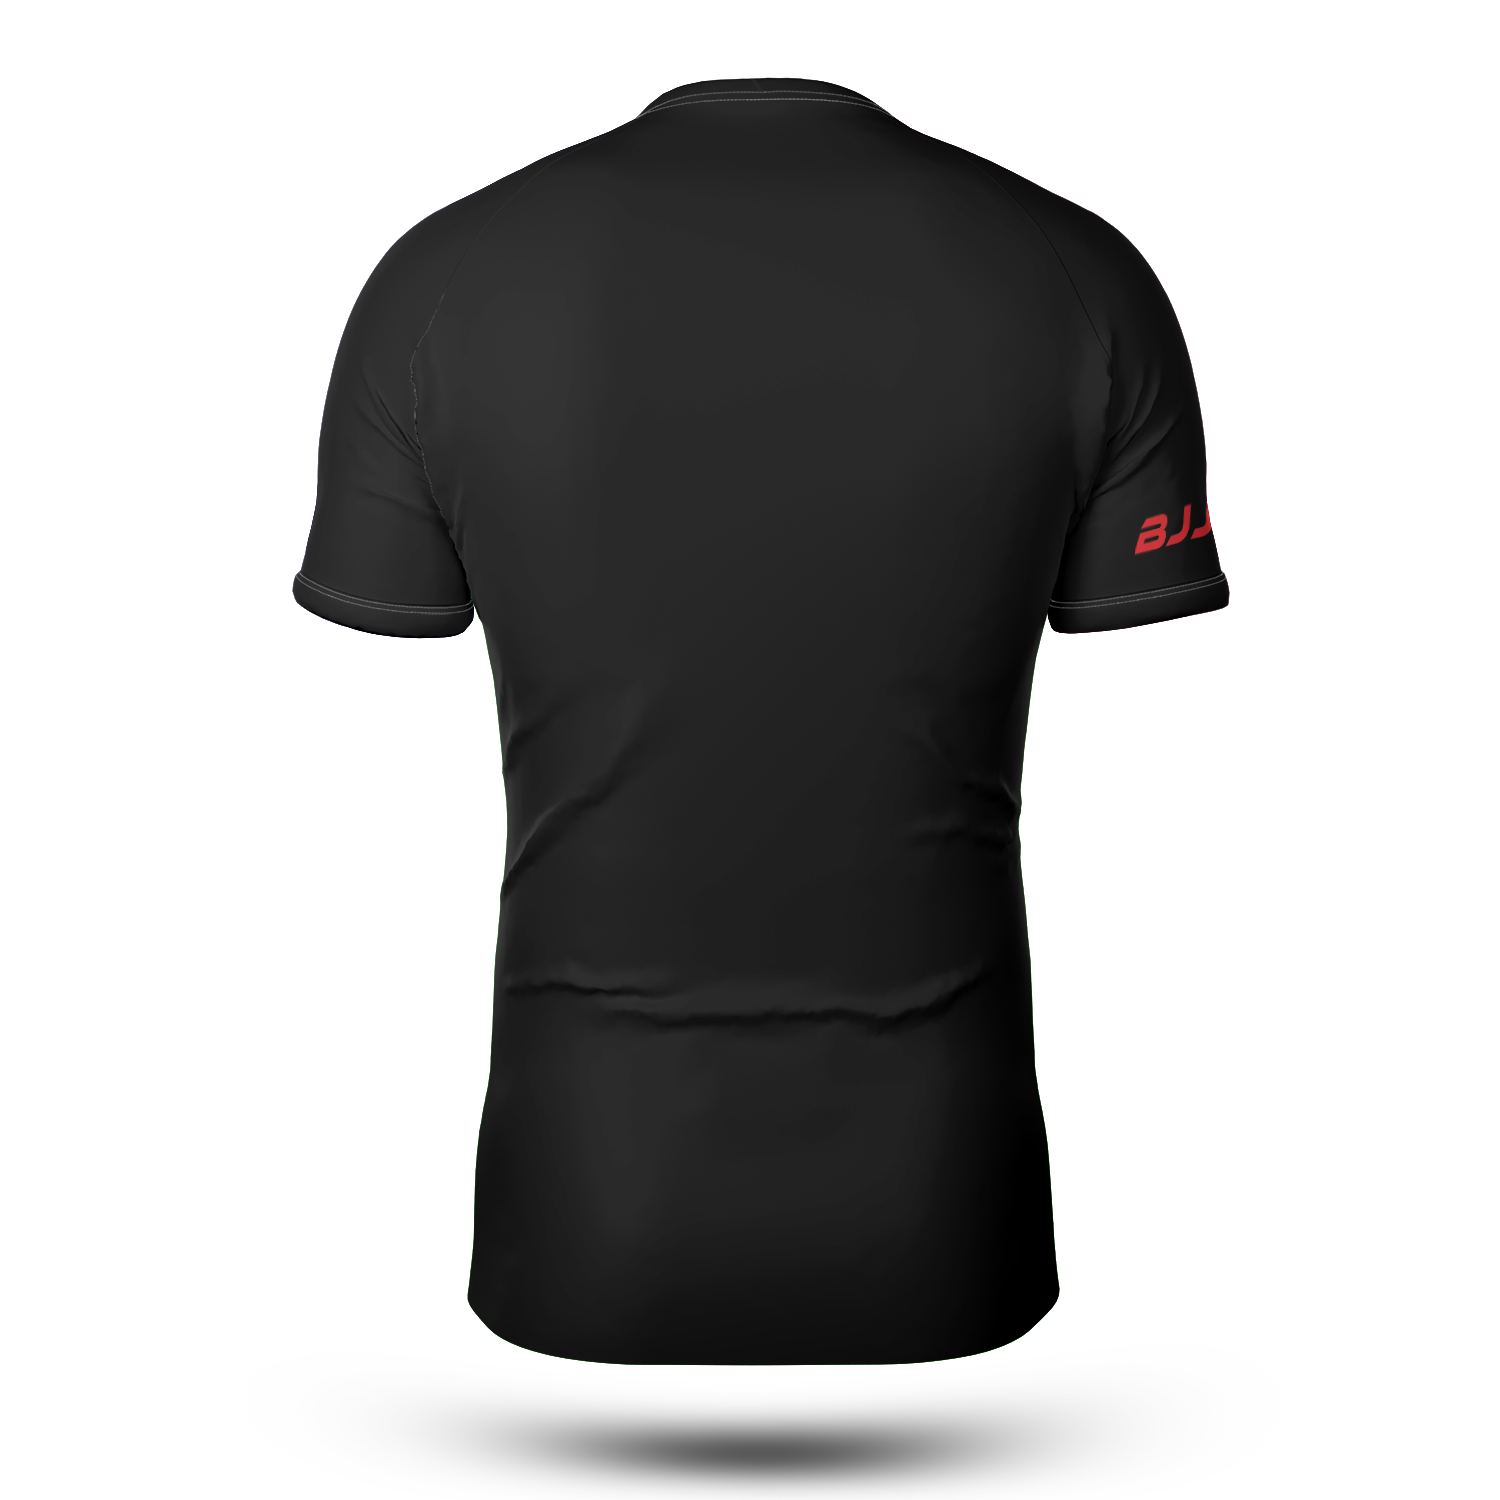 Black BJJ Rashguard with Submit in white lettering